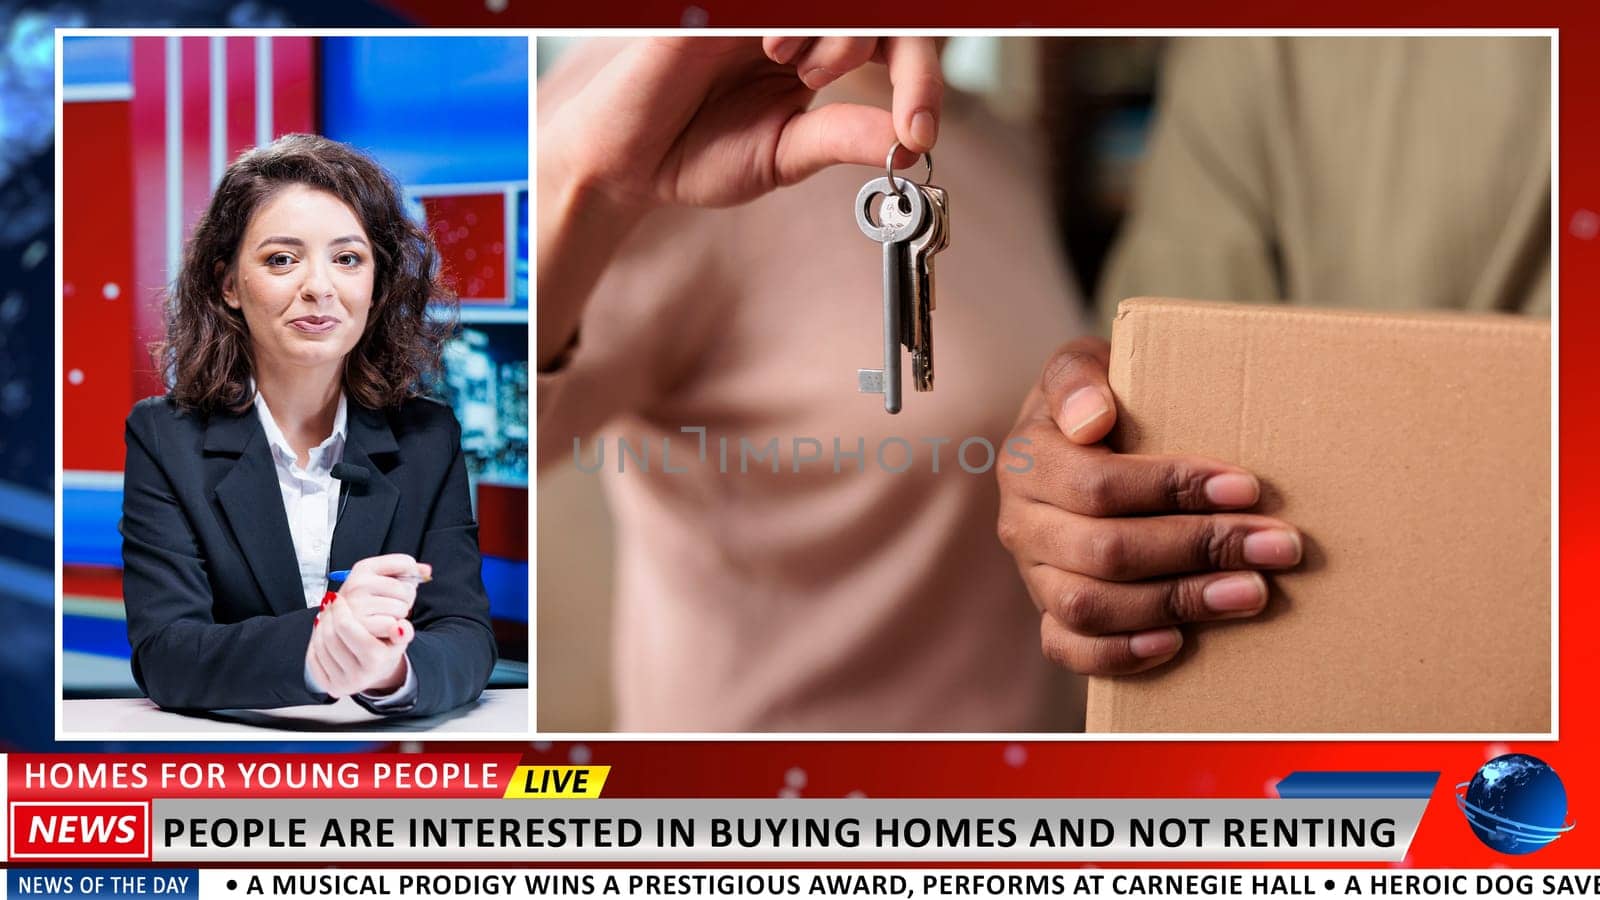 News anchor gives real estate news, addressing multiple cases where young people choose to buy houses instead of renting. Woman presenter discusses news about homeowners and property.